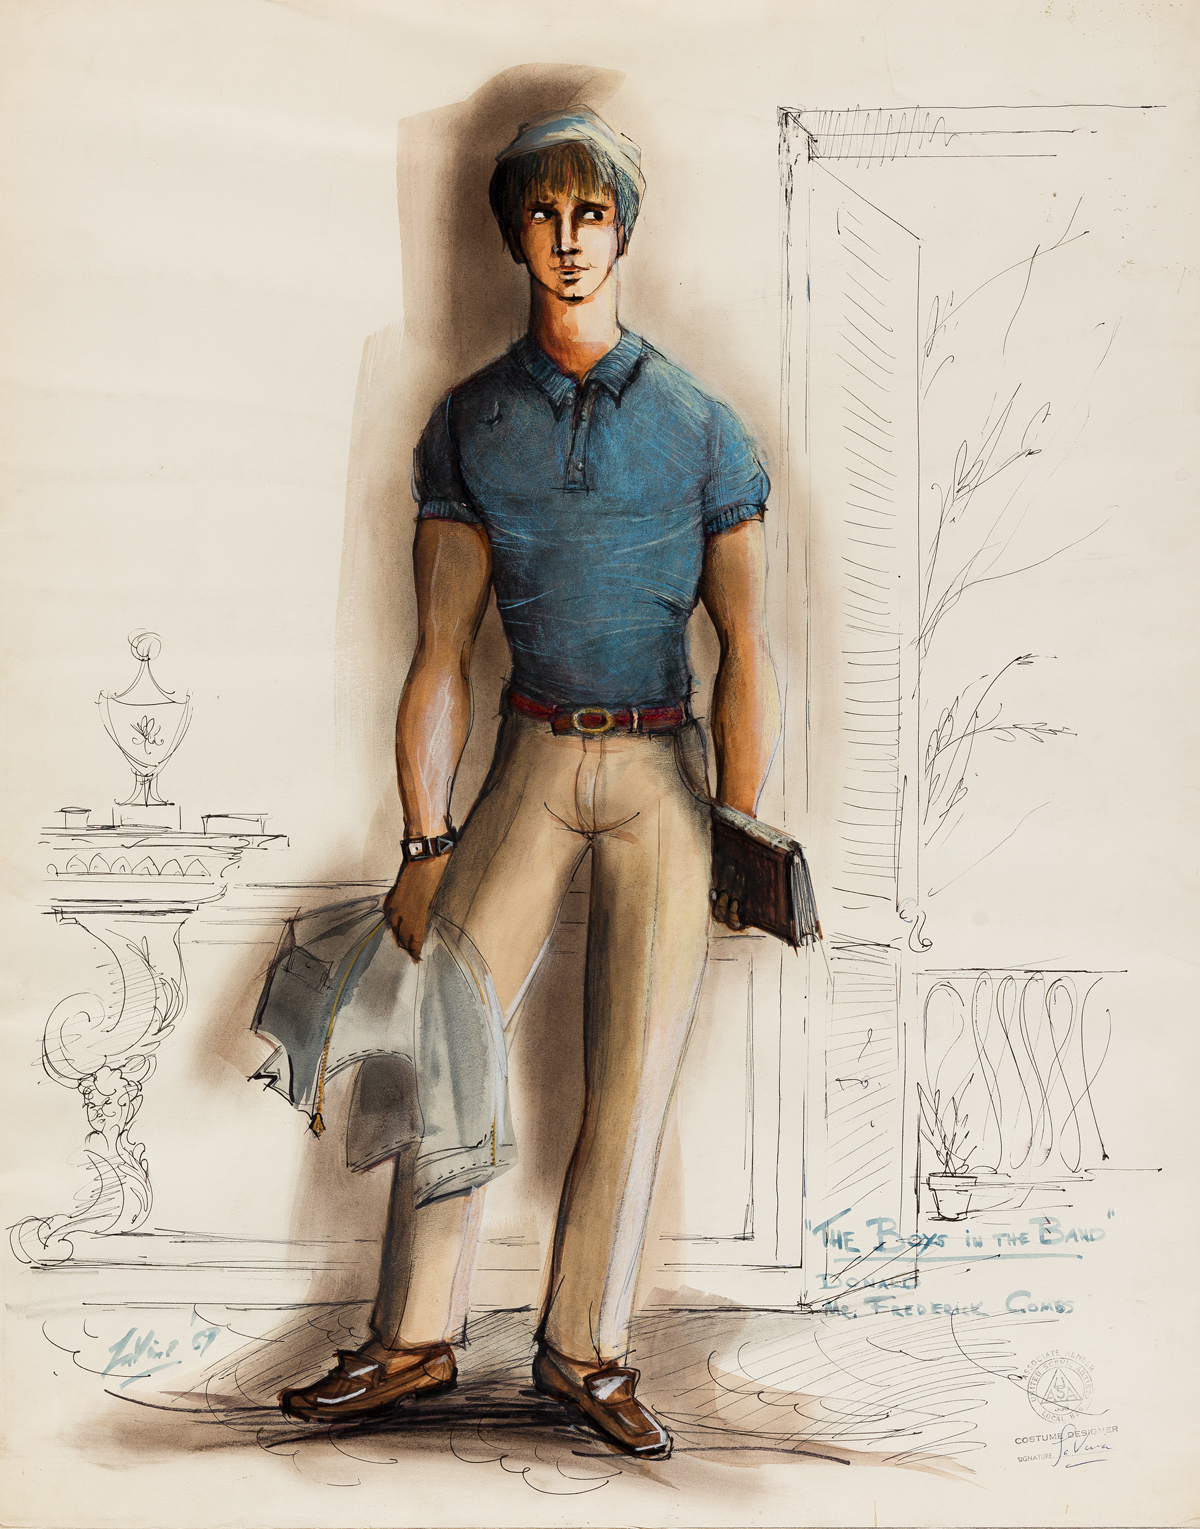 W. ROBERT LA VINE (1920-1979) Costume design for the character Donald in the 1970 film The Boys in the Band.